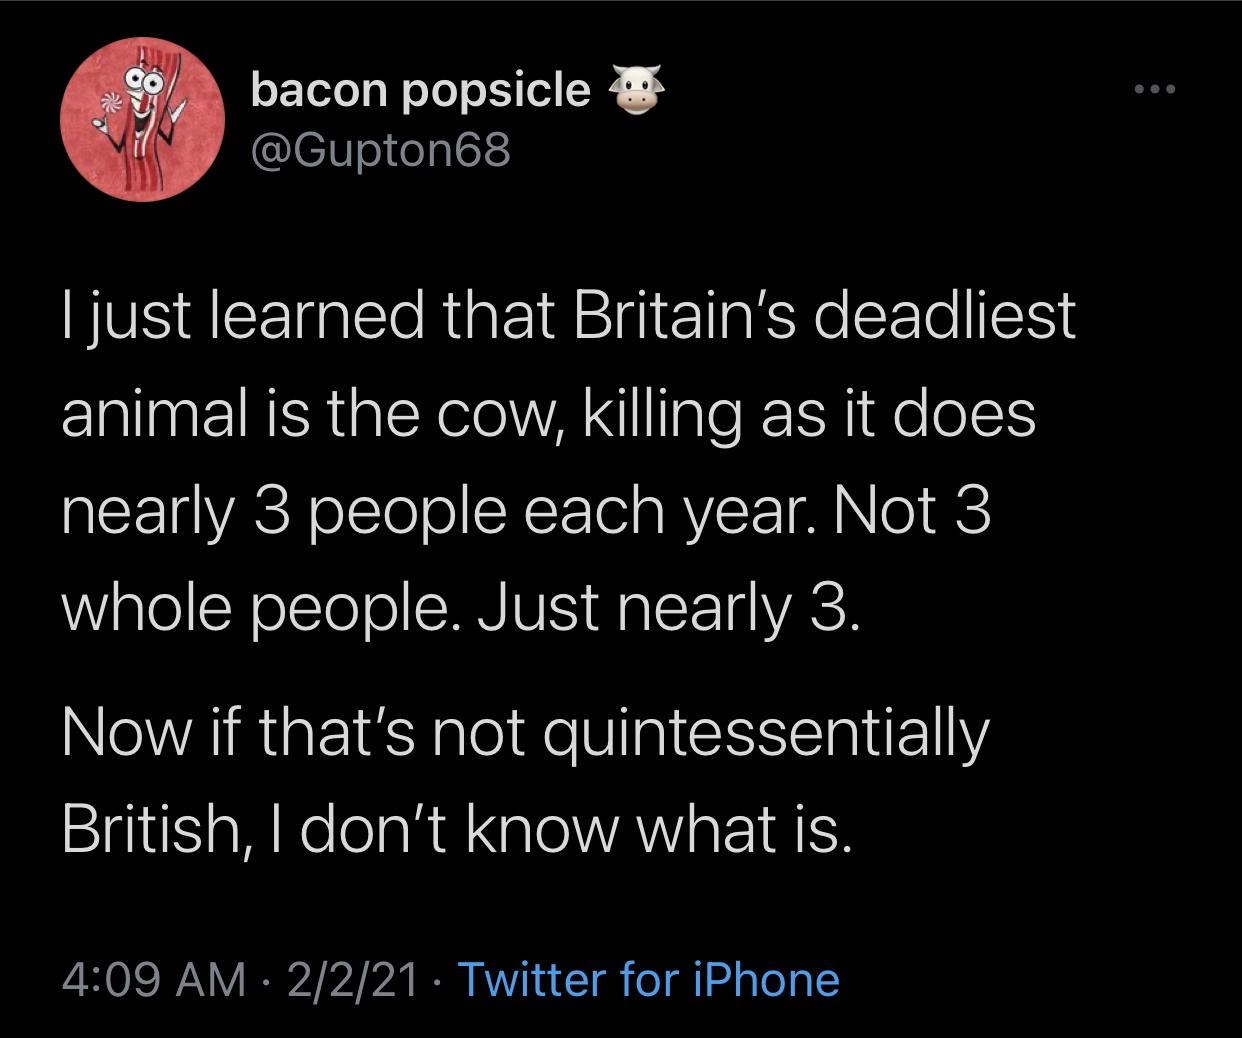 good night quotes - bacon popsicle I just learned that Britain's deadliest animal is the cow, killing as it does nearly 3 people each year. Not 3 whole people. Just nearly 3. Now if that's not quintessentially British, I don't know what is. 2221 Twitter f